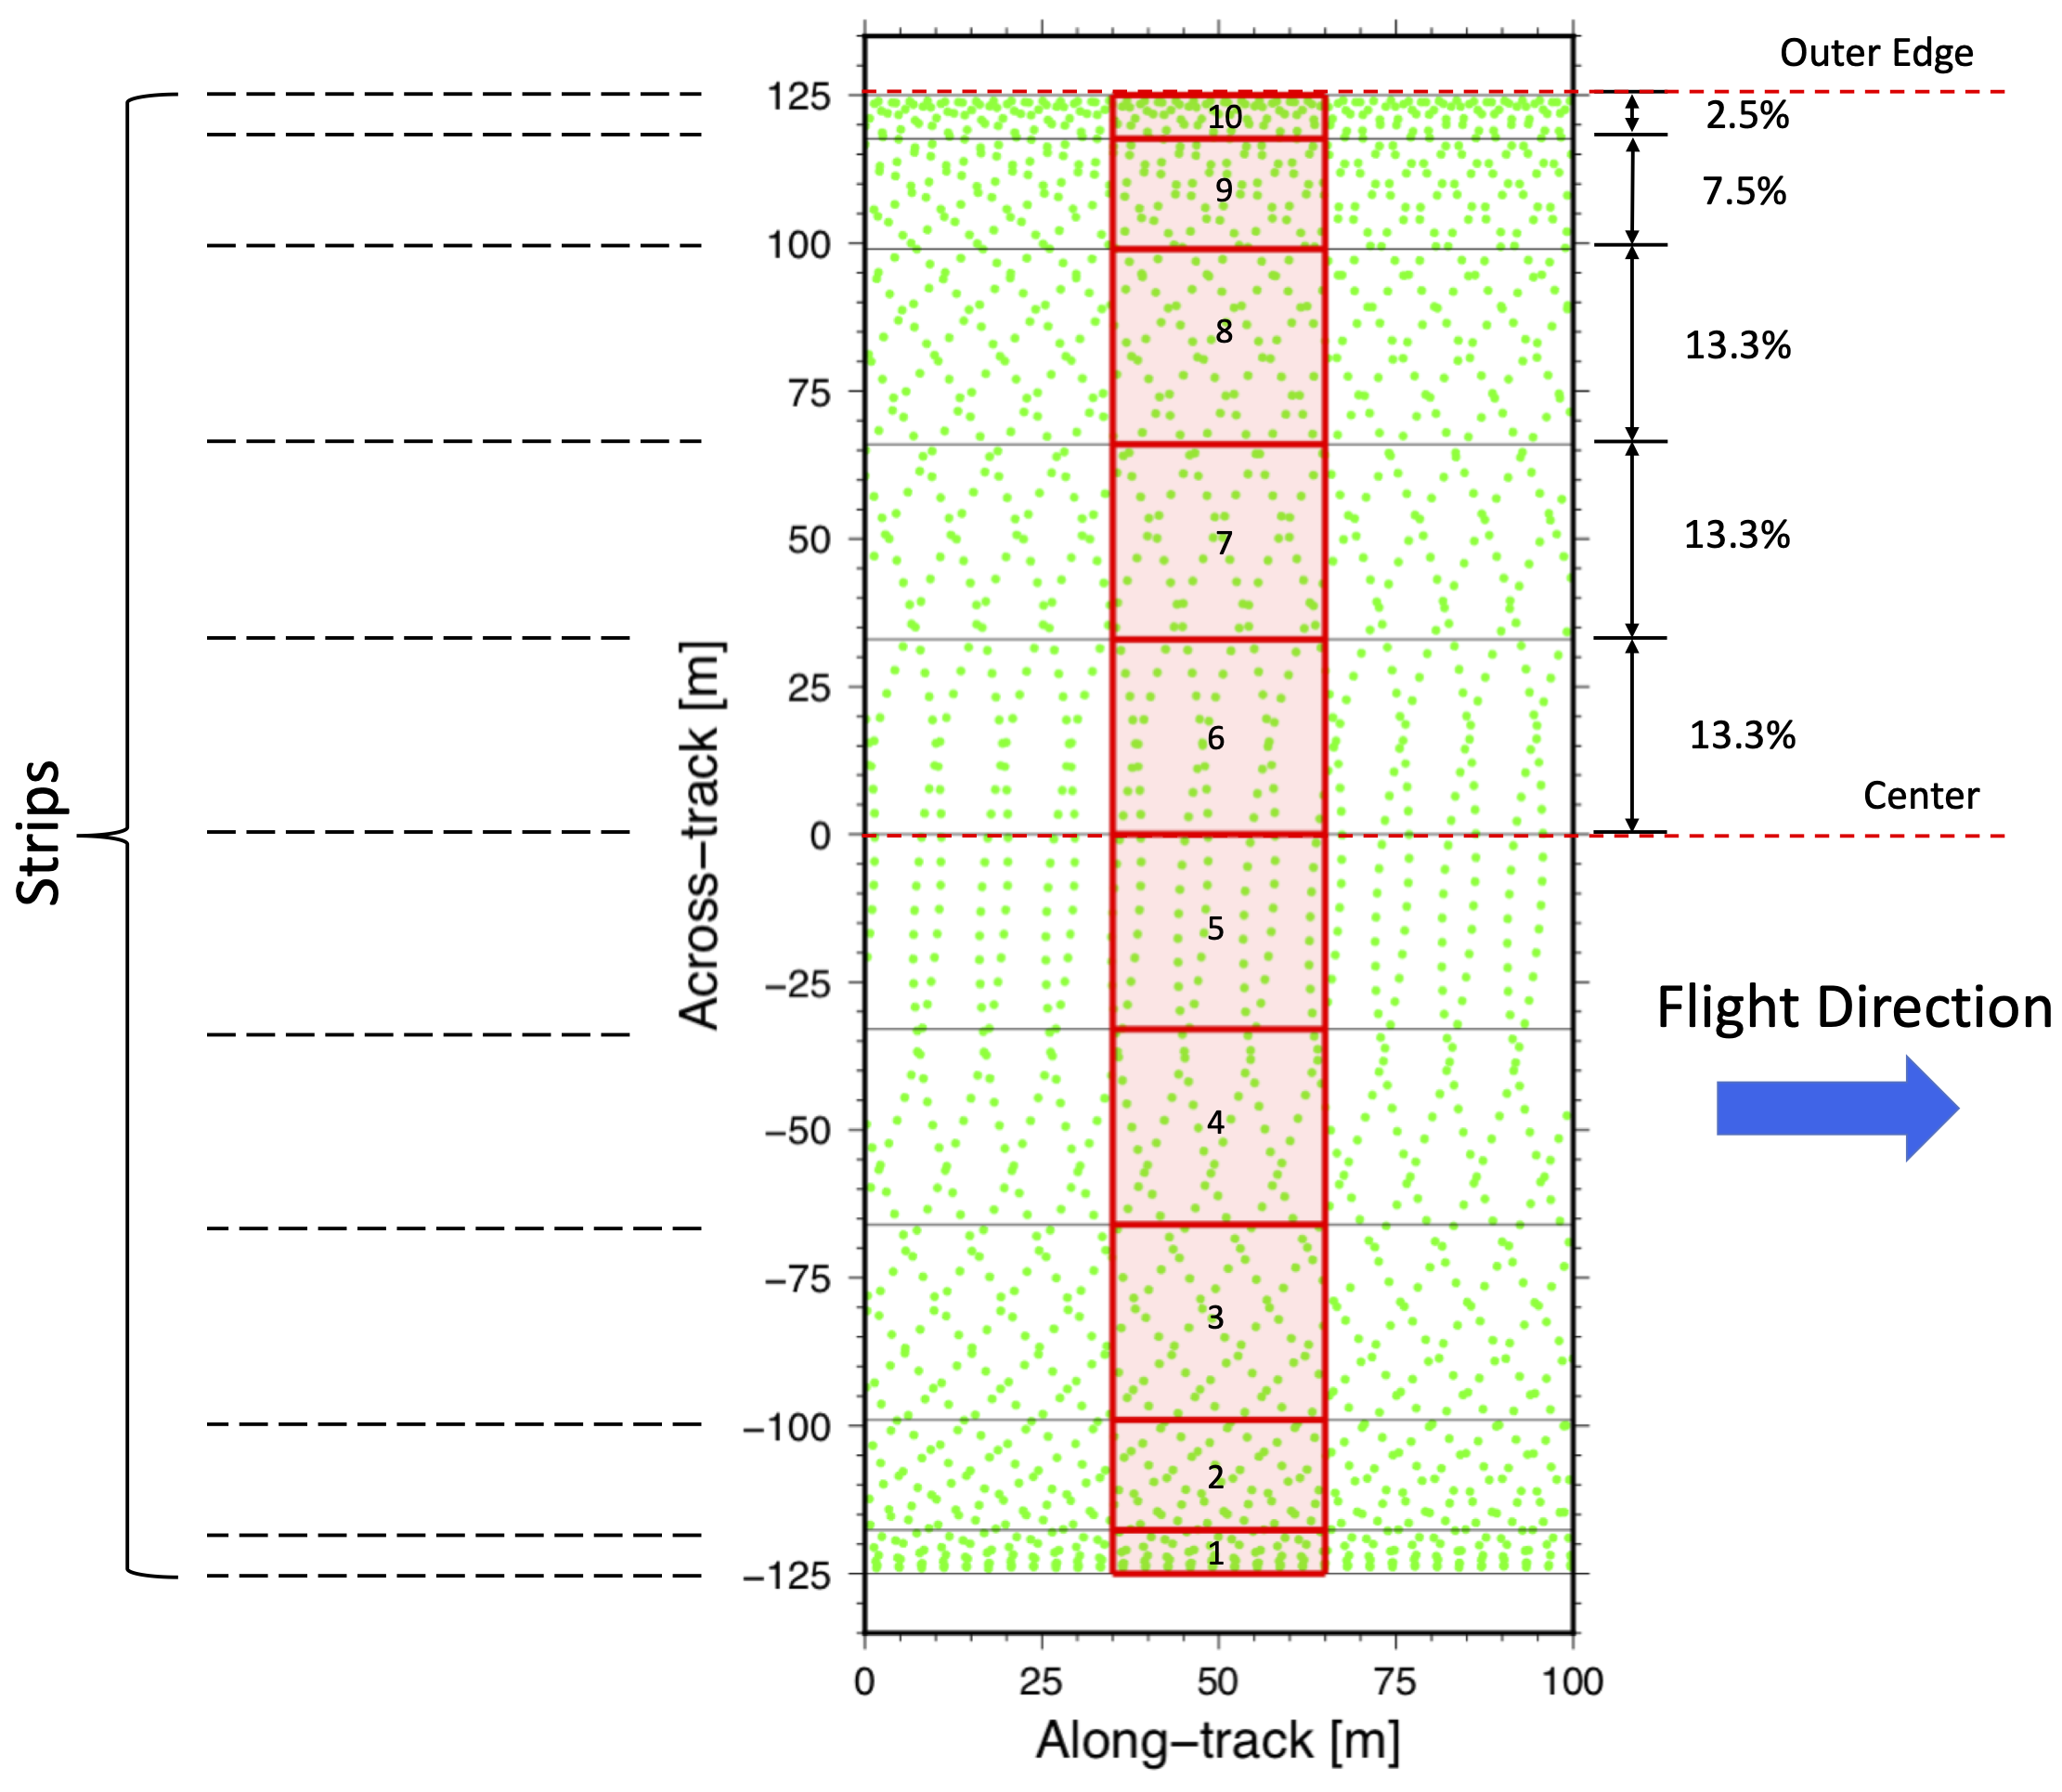 Figure 1. Depiction of grid
		configuration applied to ATM lidar elevation data in the derivation of the
		surface elevation product. Grid cells are numbered in the across-track
		direction using a column reference value of 1–10.